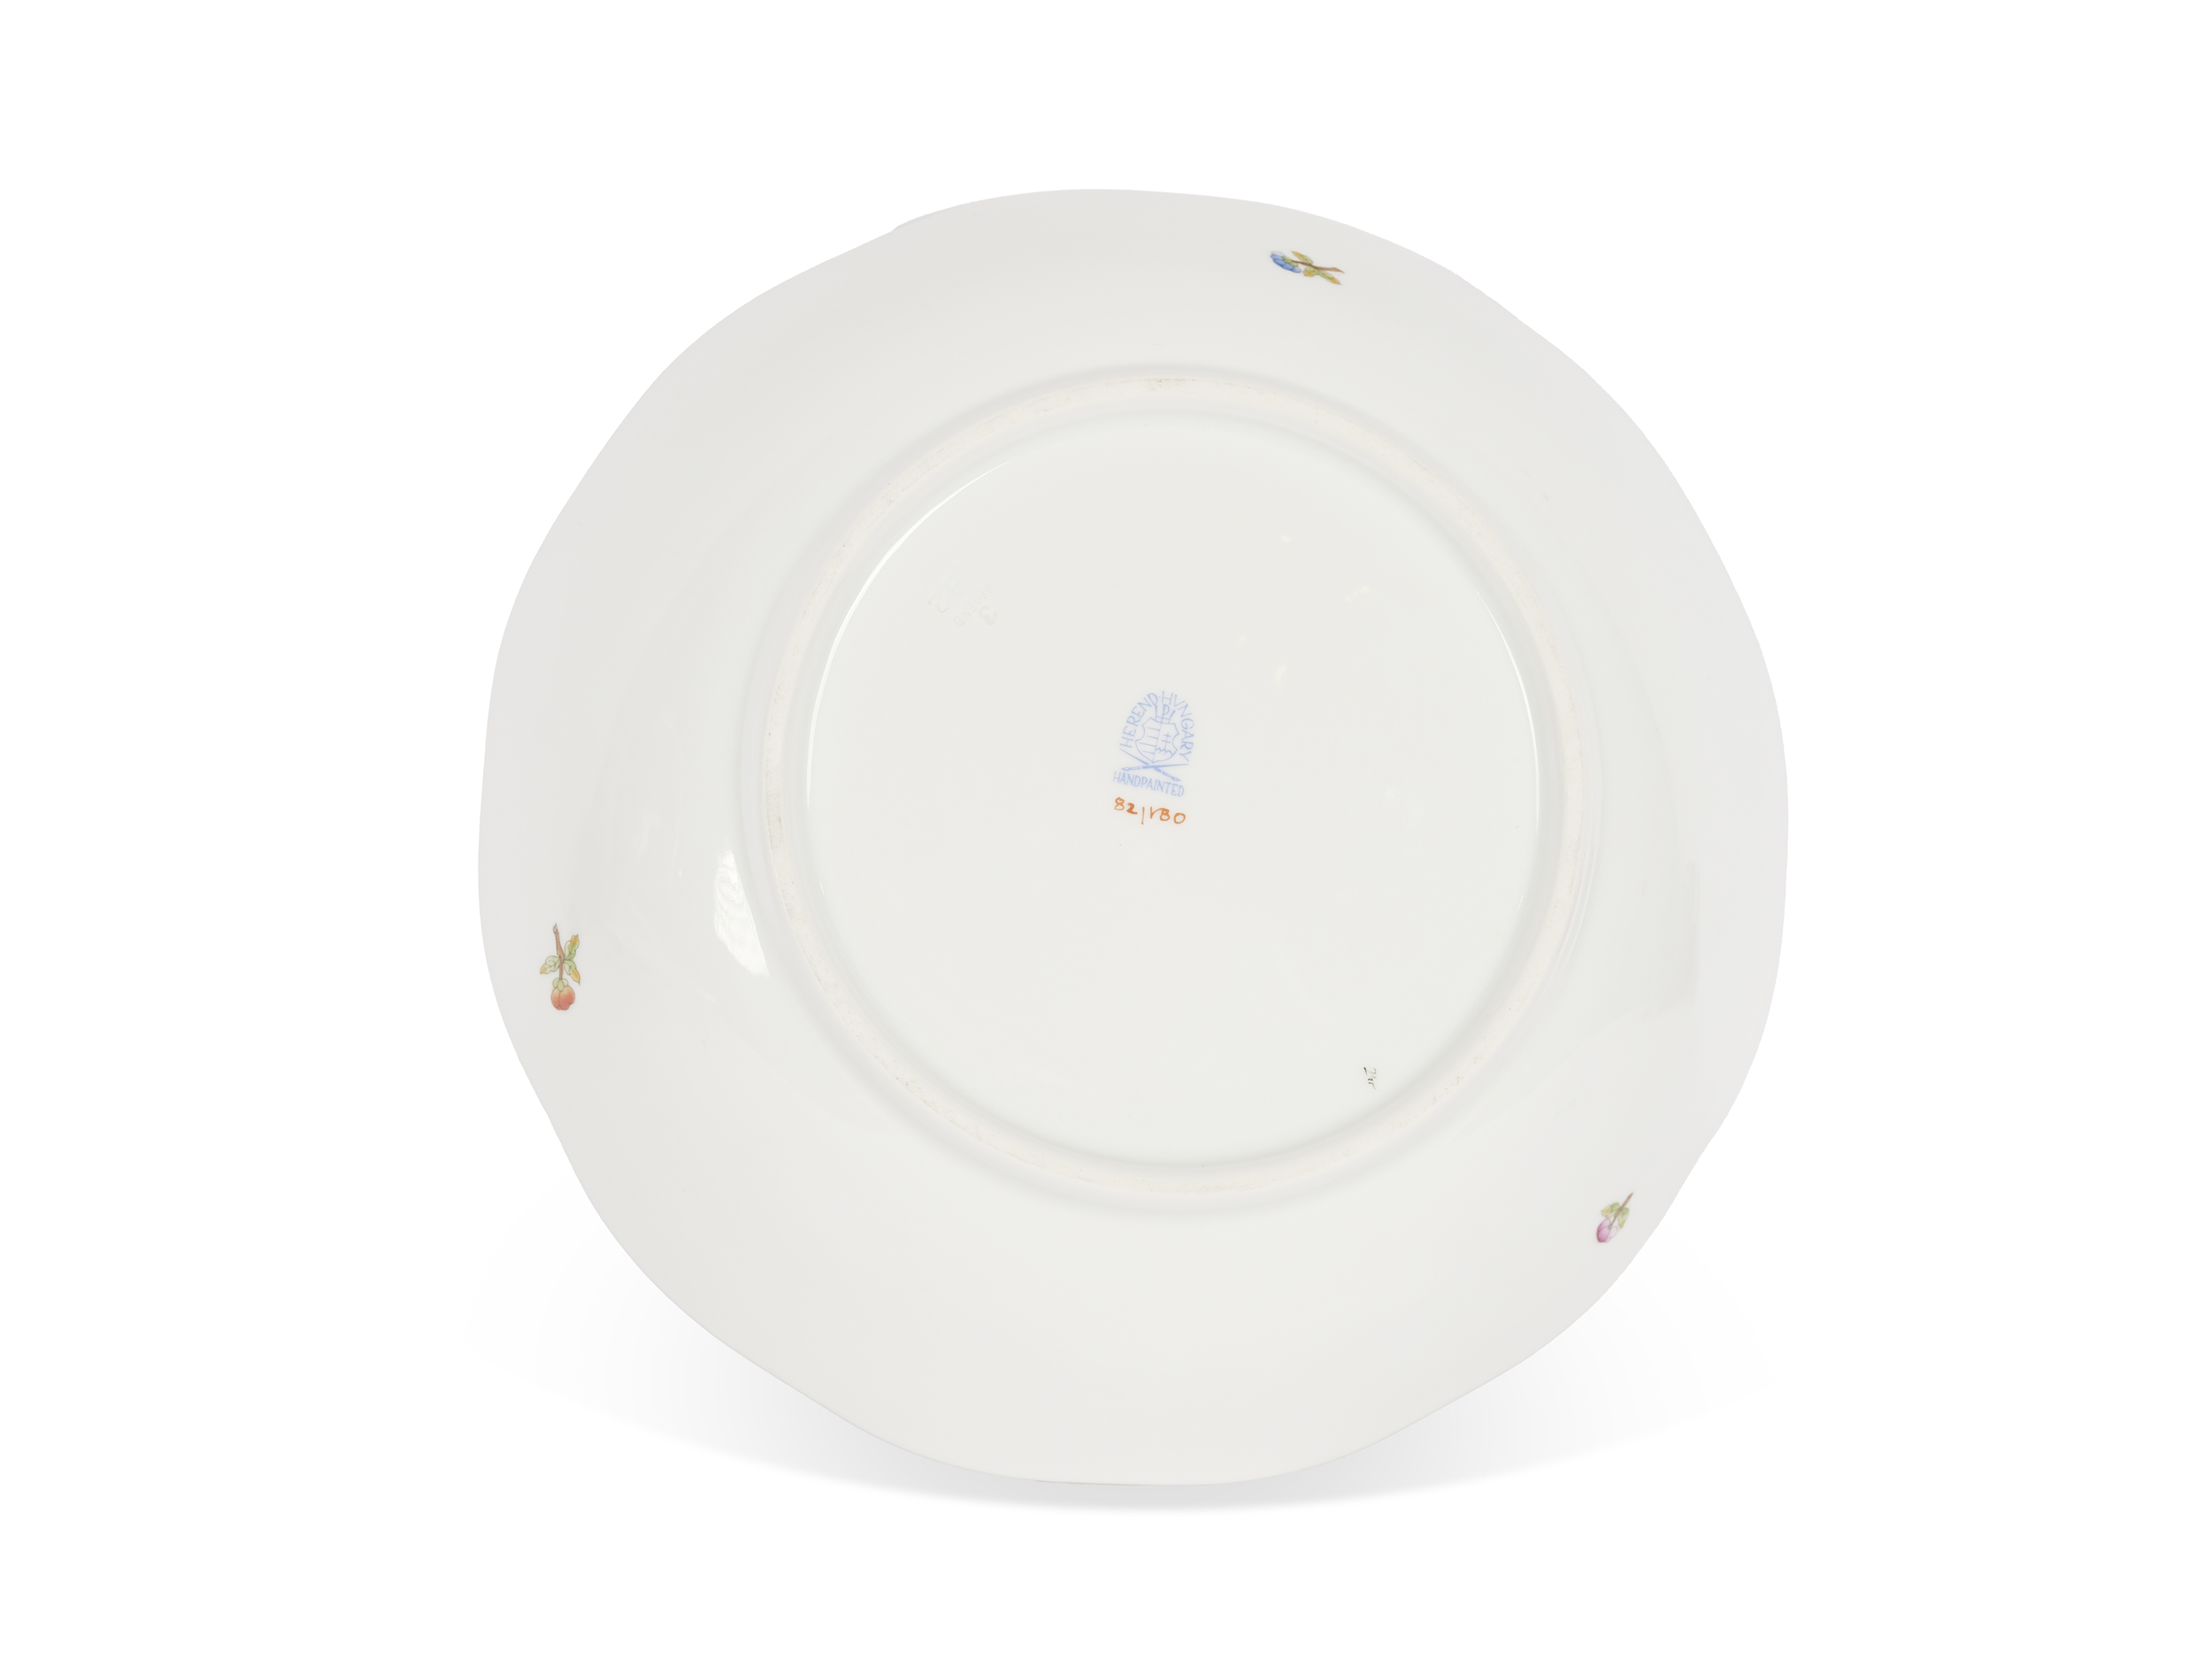 Dinner service for 6 persons, 25-piece, Herend, Victoria decor - Image 9 of 10